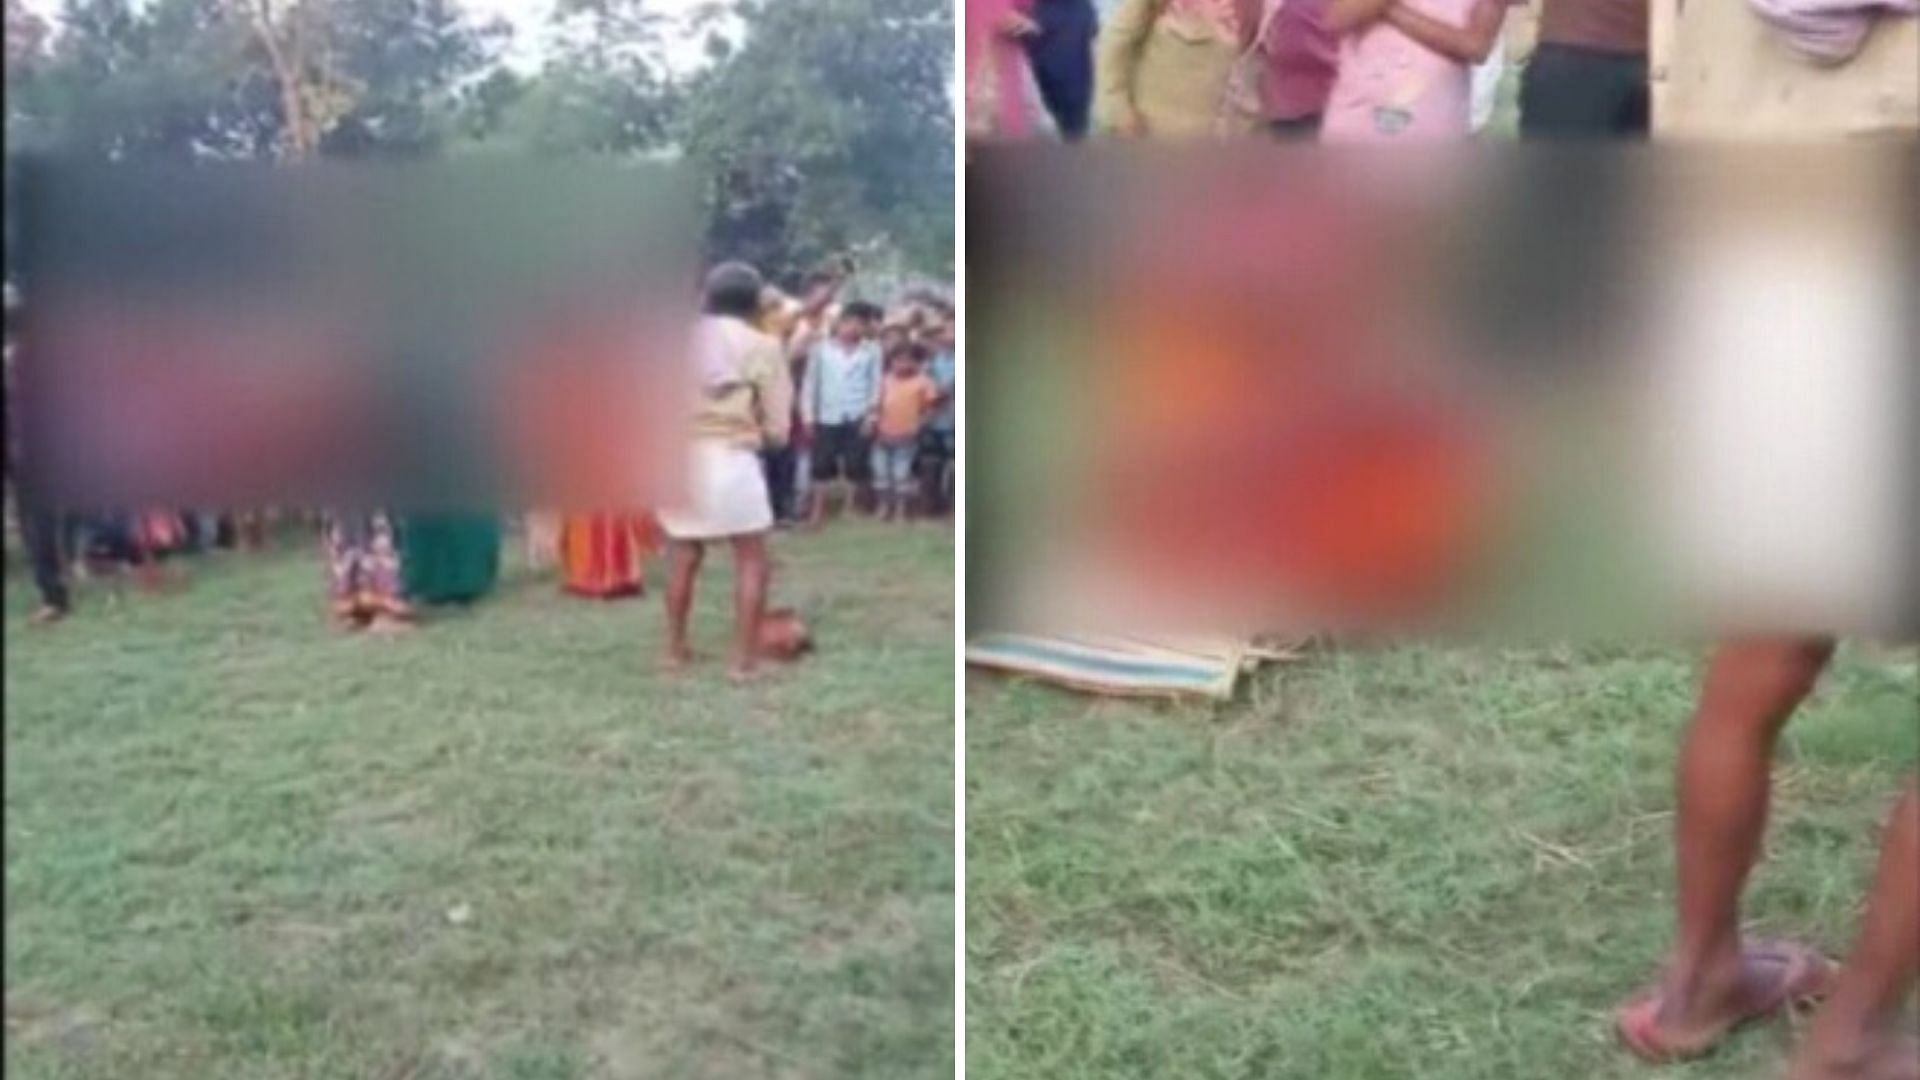 The incident which took place in Muzaffarpur’s Dakrama village on 4 May was recorded on video and shared widely.